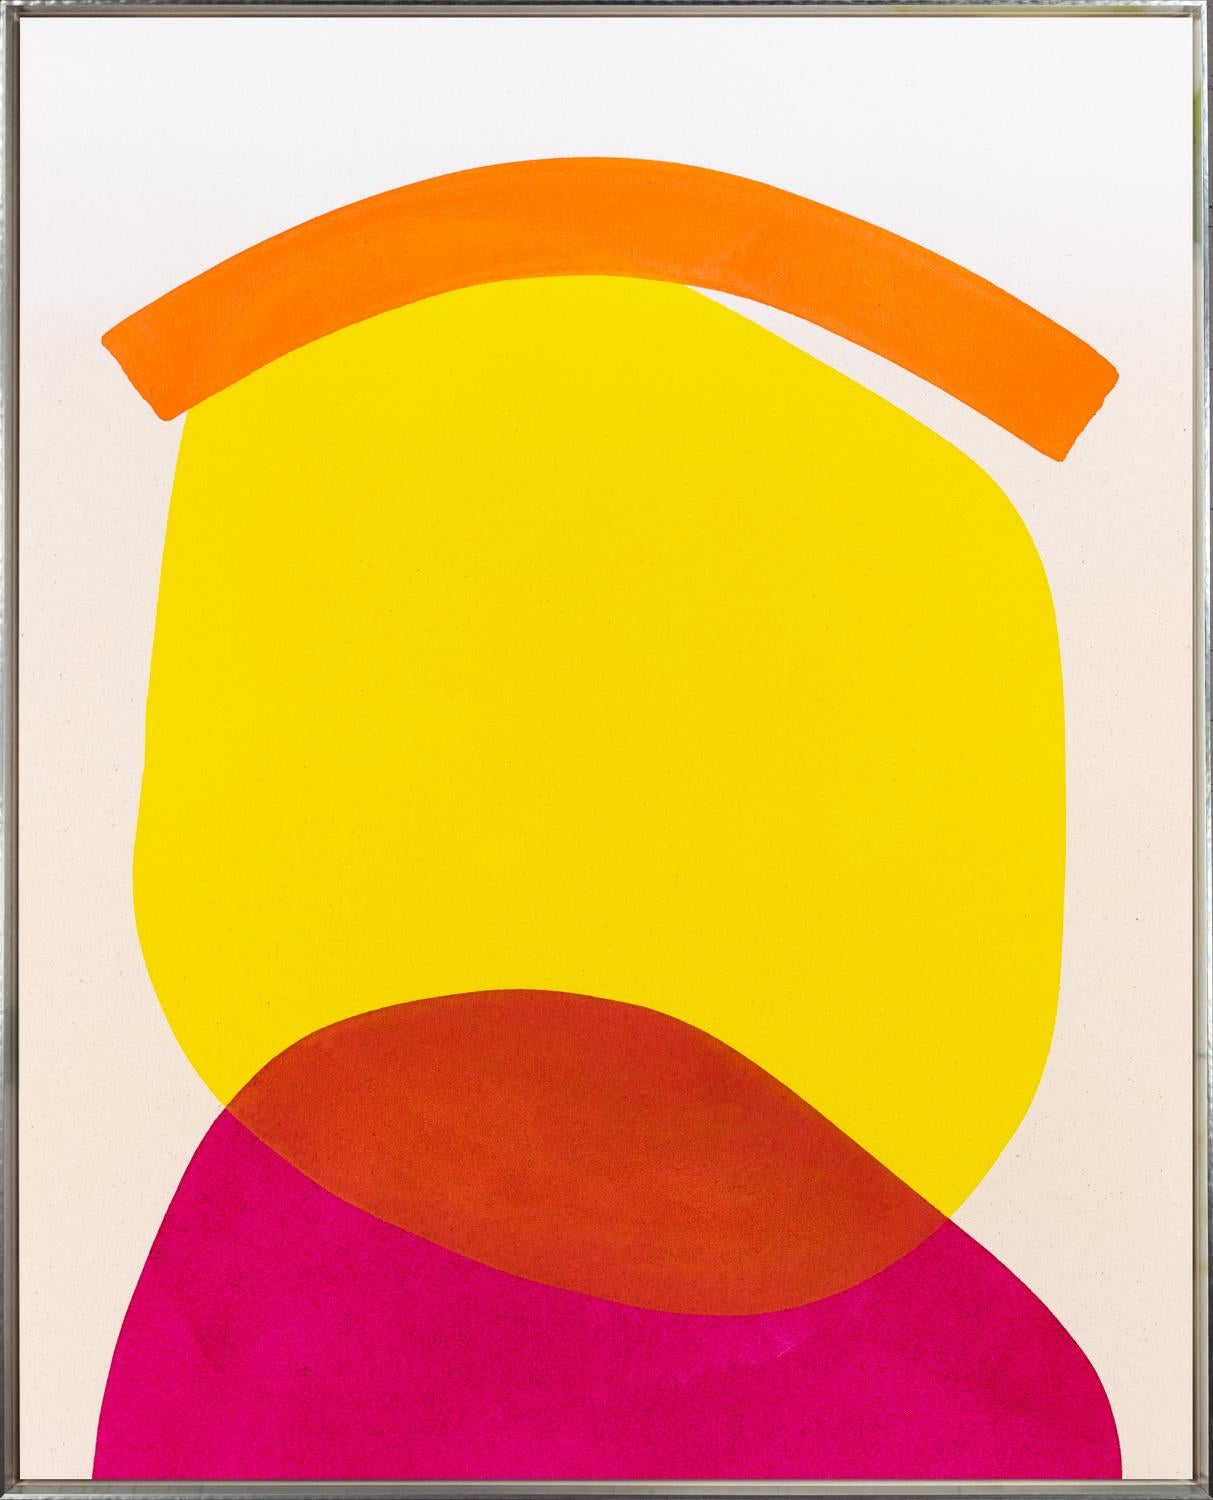 "Silent House With Yellow And Magenta And Orange Roof" is a framed contemporary acrylic painting on canvas by Aron Hill, depicting abstract shapes in different shades of yellow, magenta, and yellow on raw canvas. The carefully composed forms are at